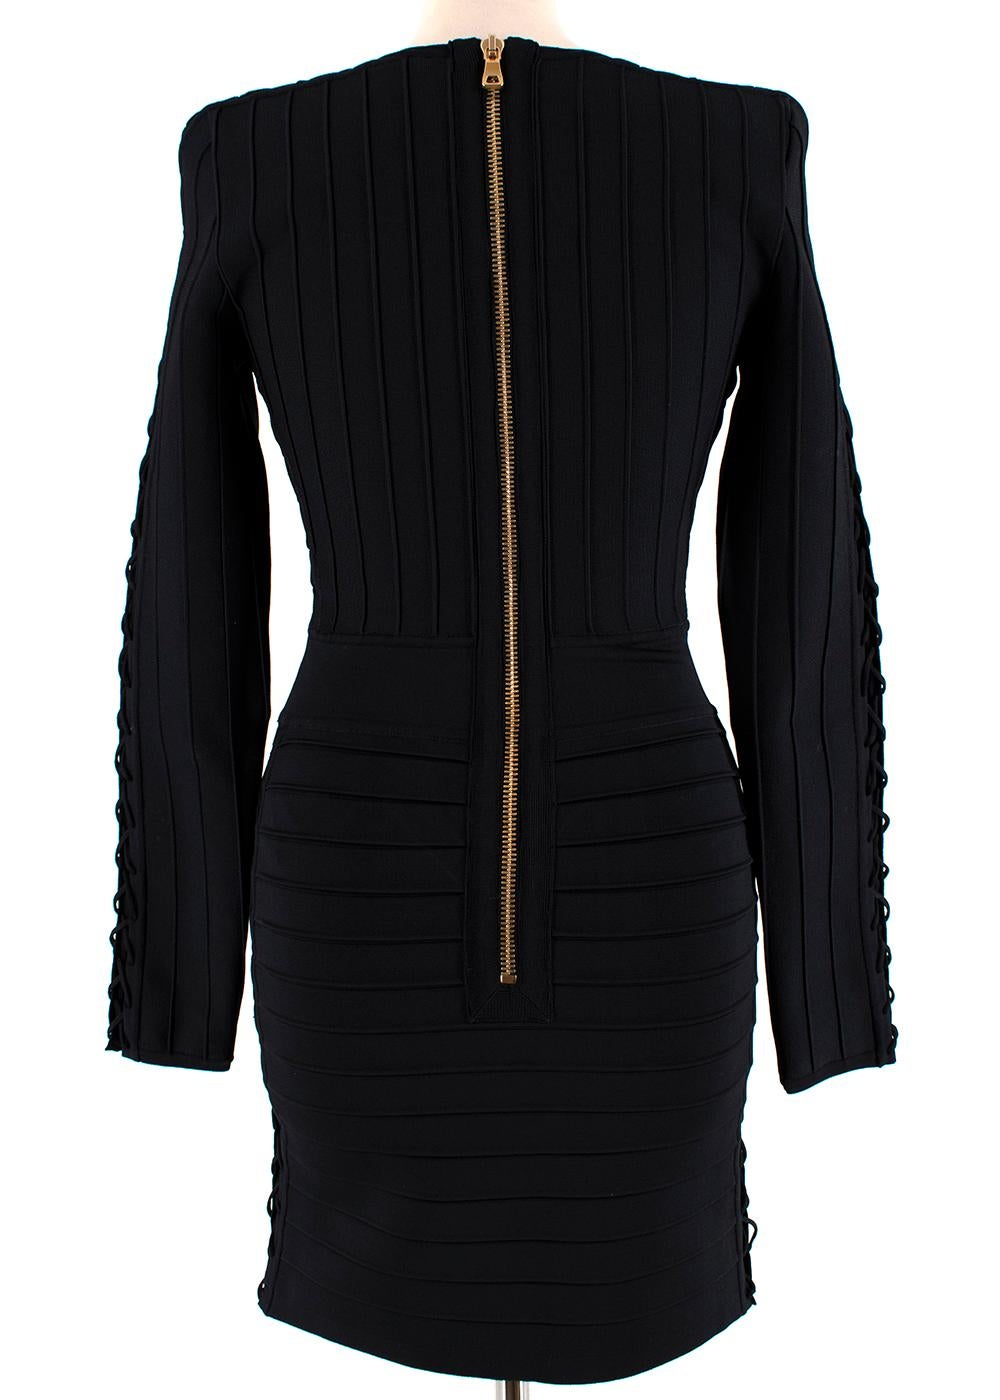 Balmain Black Fitted Lace-Up Mini Dress - Size US 4 In New Condition For Sale In London, GB